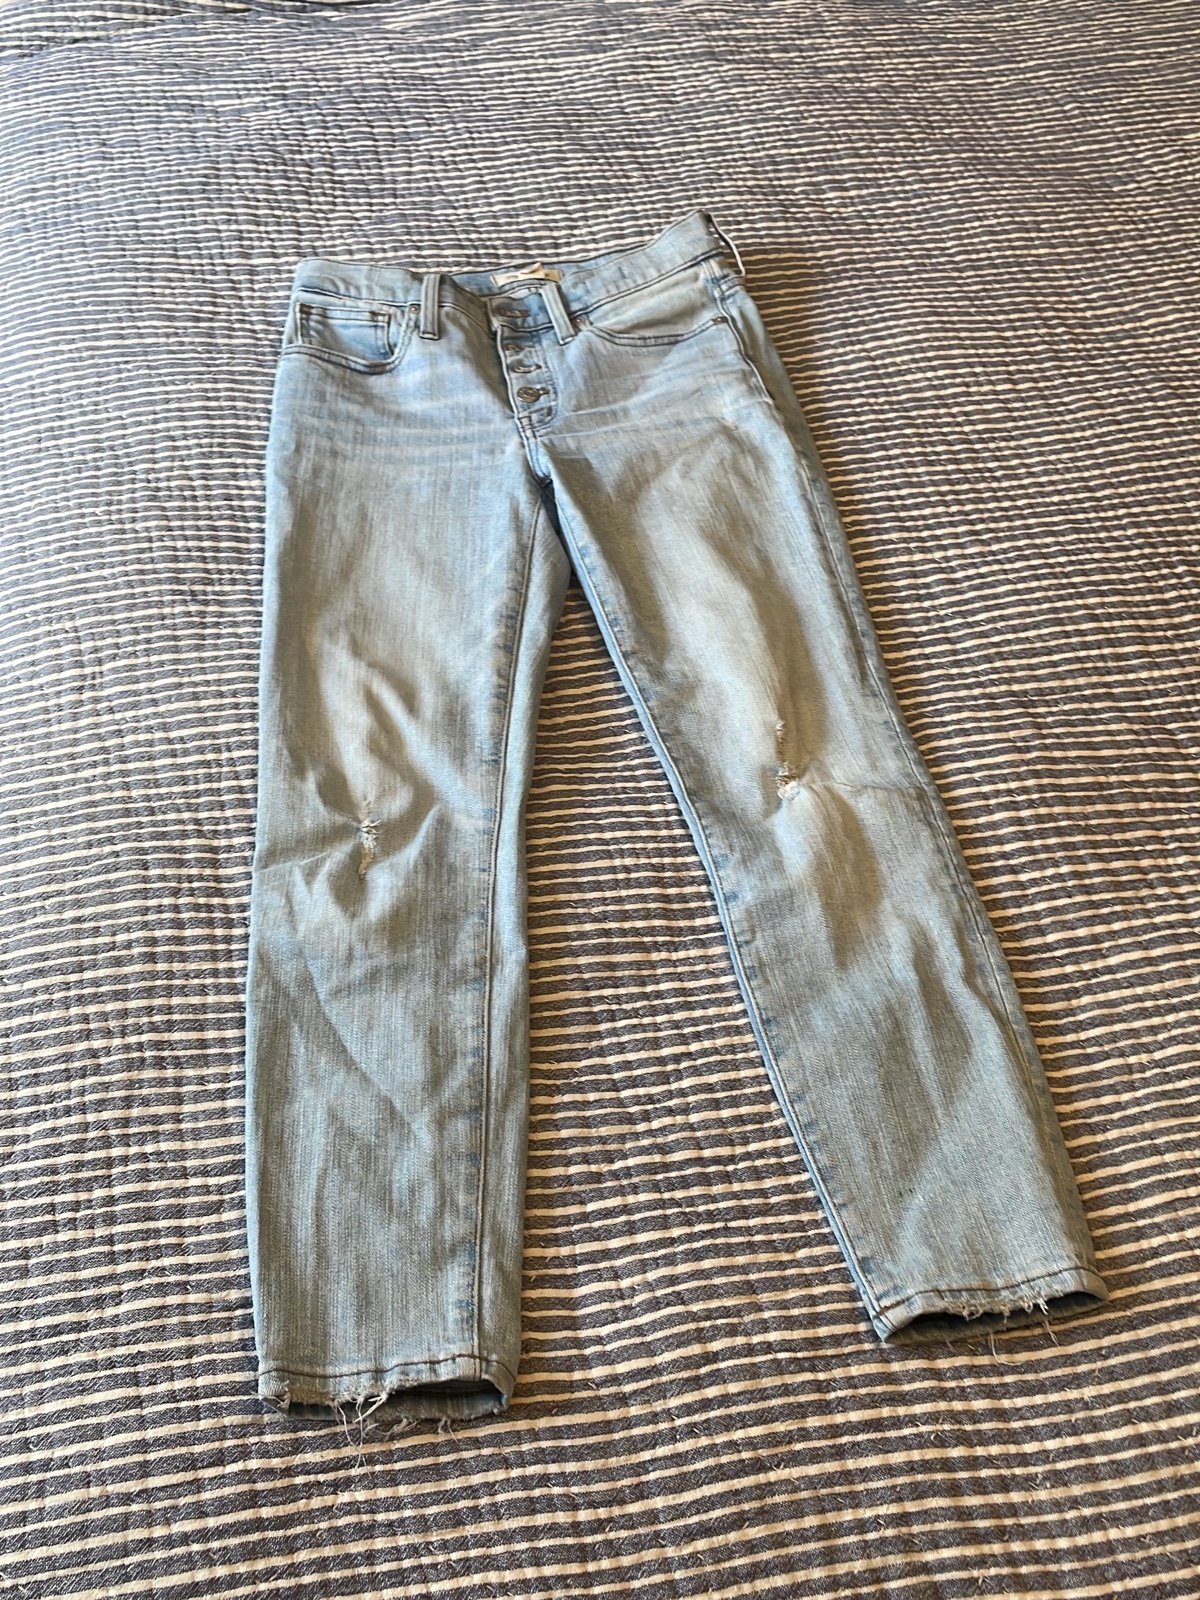 save up to 70% Madewell jeans Gwr2nMoXQ Buying Cheap